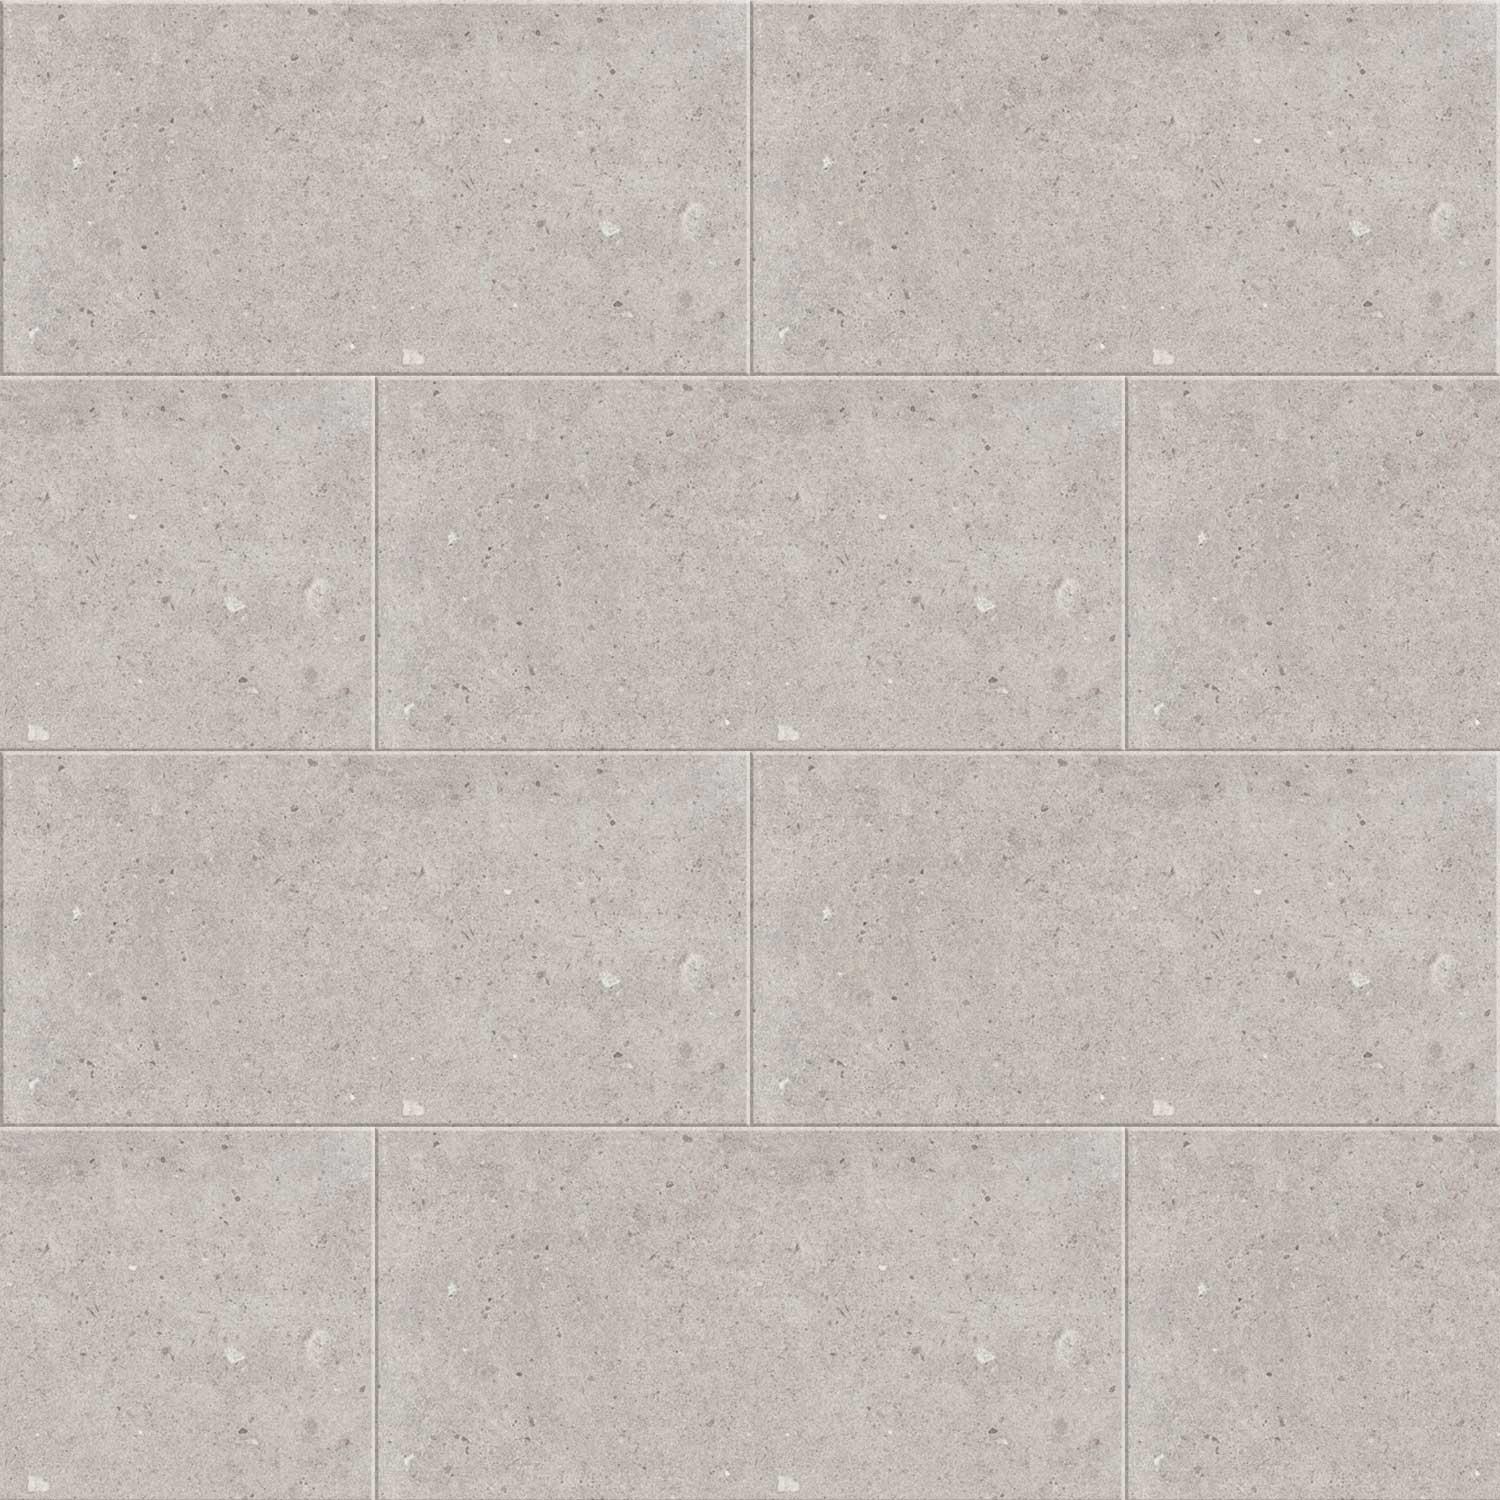 Ground Grey Porcelain Tile Wall Floor Stone Effect R10 300x600mm